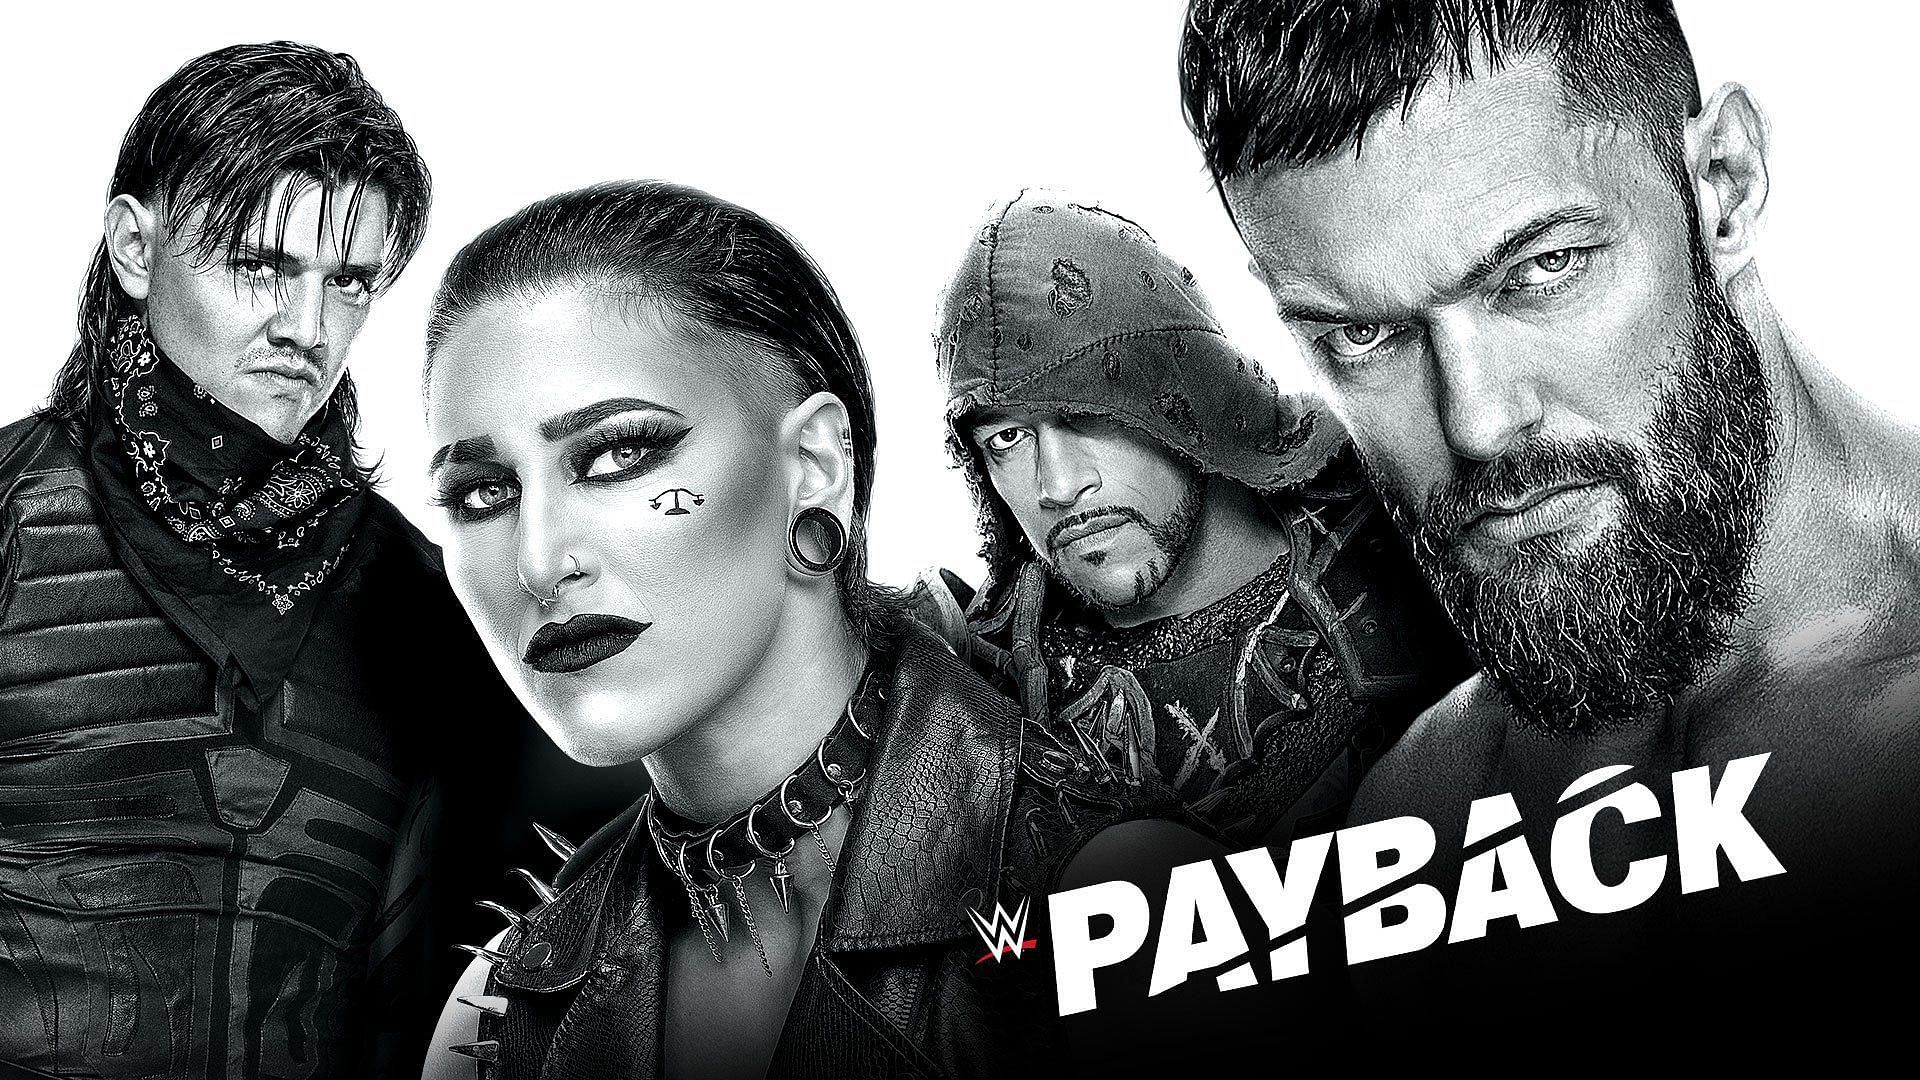 The poster for Payback featuring The Judgment Day